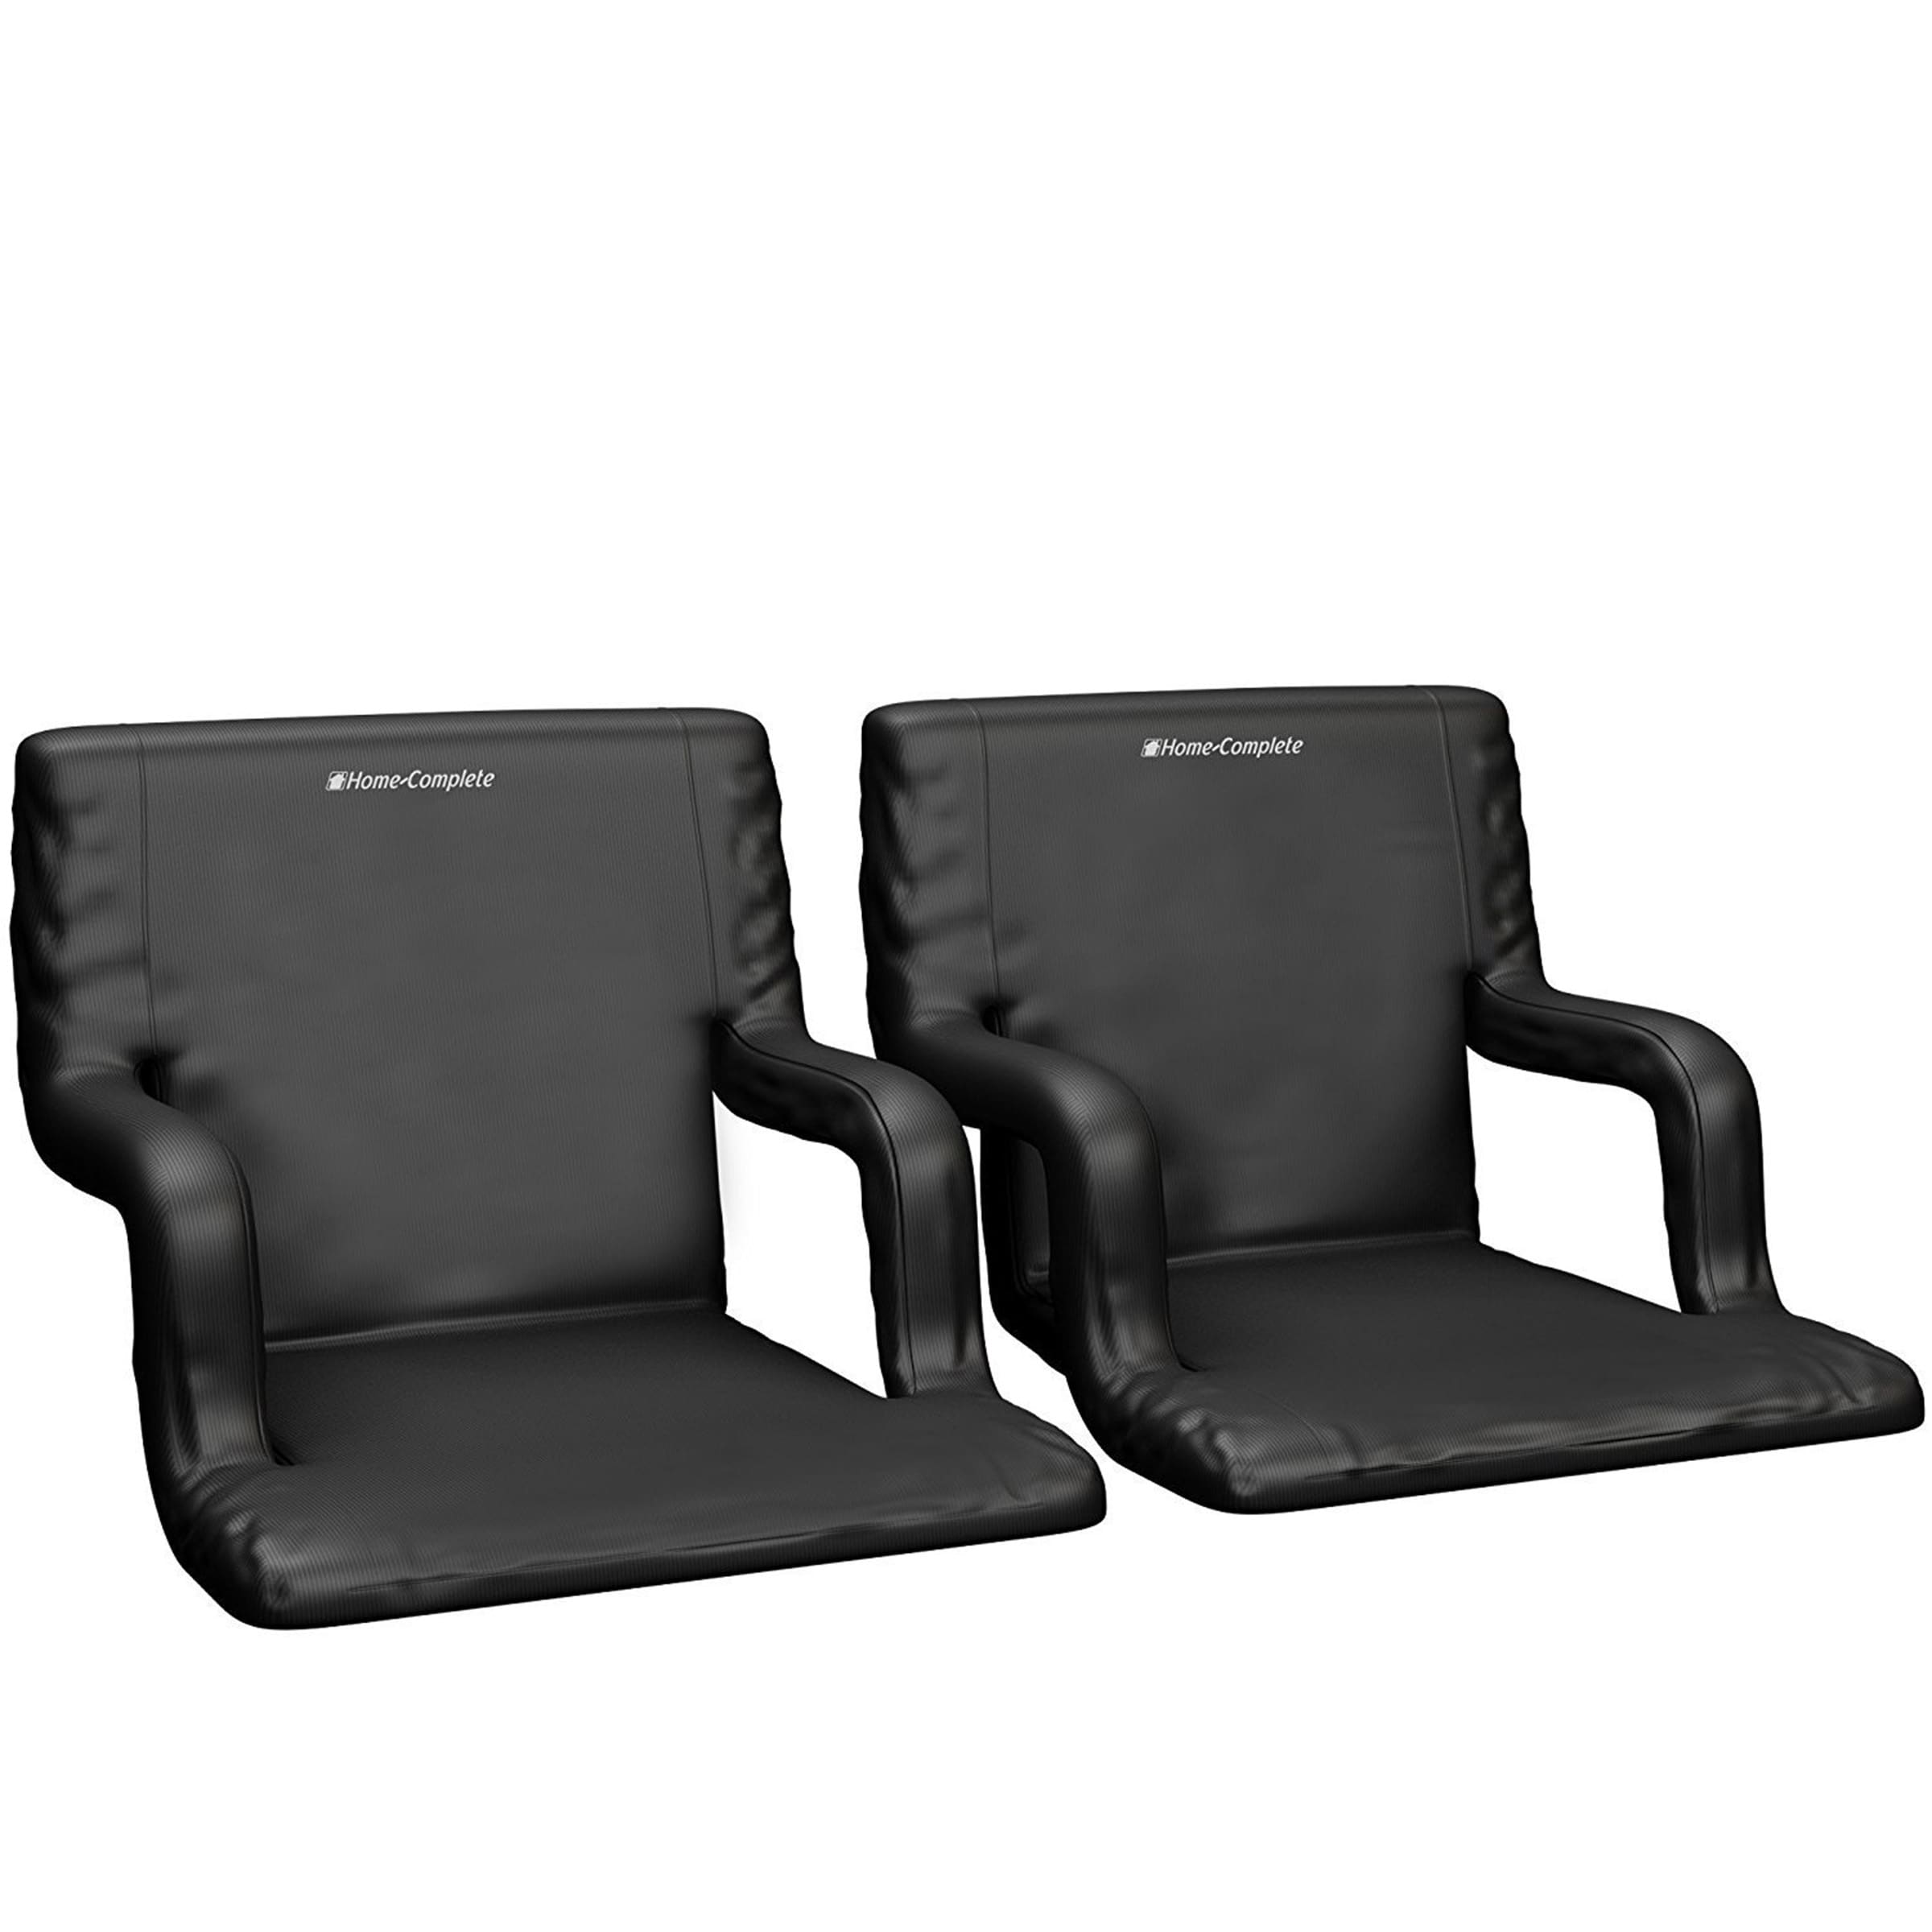 https://ak1.ostkcdn.com/images/products/is/images/direct/23ae063117474e710f84d5a1883dcb182105b298/Set-of-2-Wide-Stadium-Seats---Bleacher-Cushion-Set-with-Padded-Back-Support-Armrests-by-Home-Complete.jpg